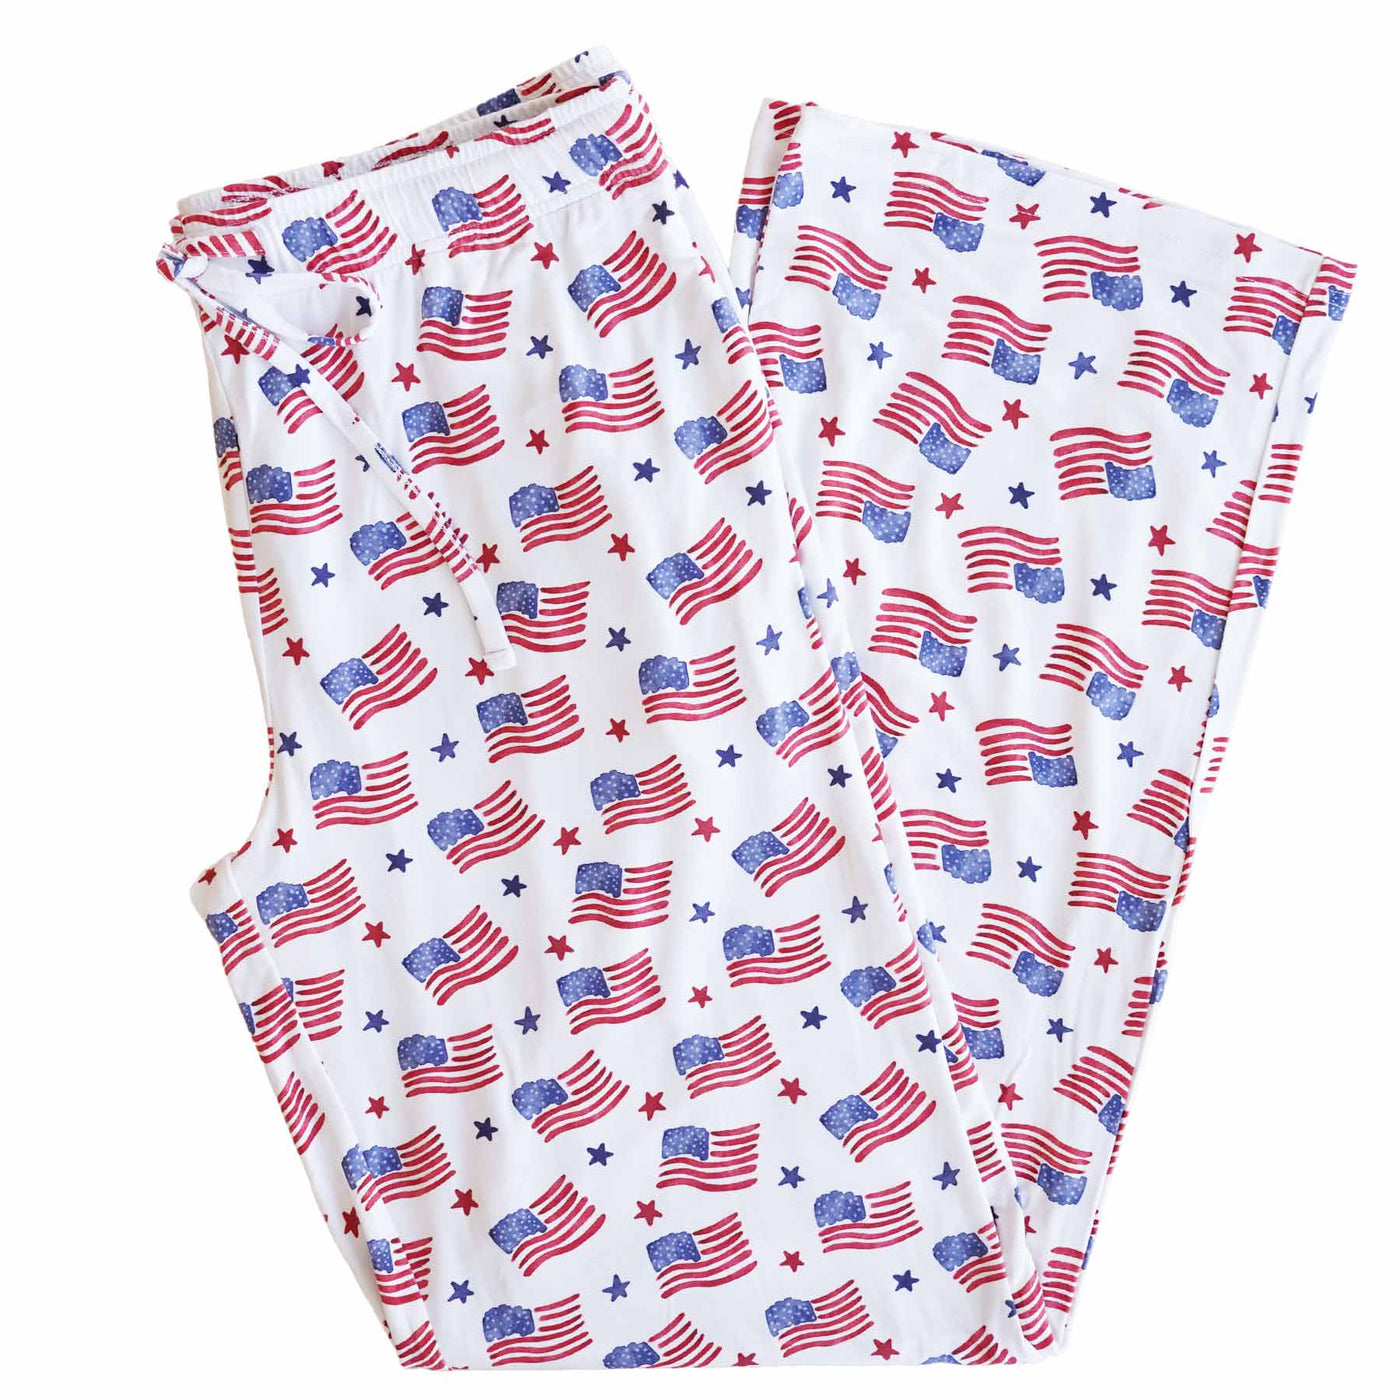 unisex adult lounge pajama pants with american flags 